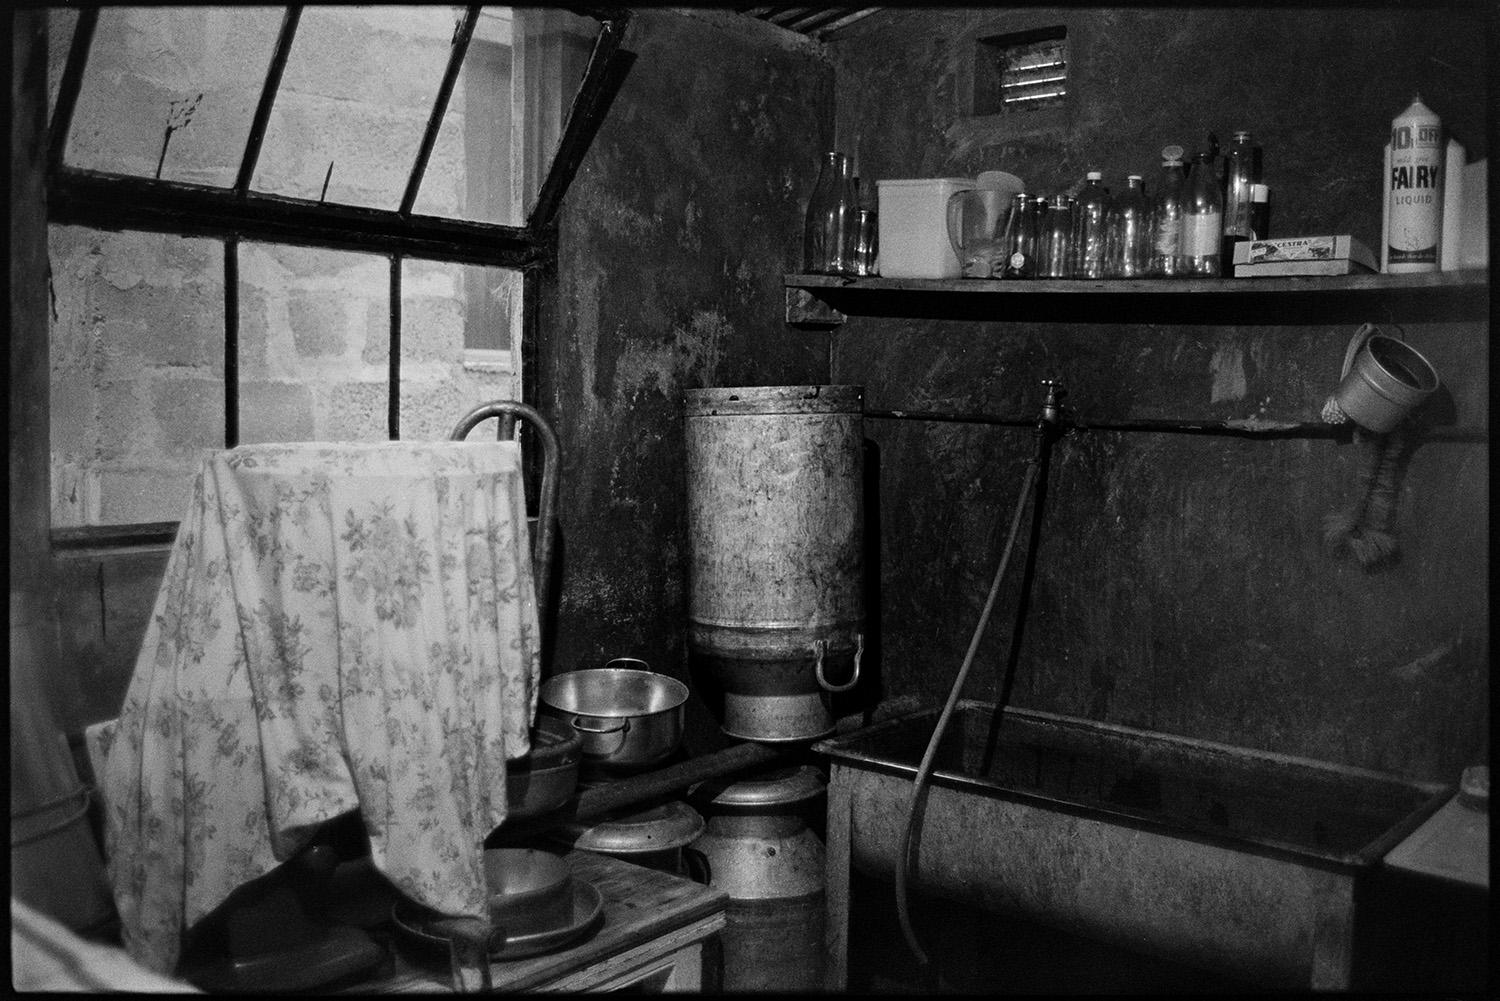 Equipment in dairy, churn etc. 
[Milking equipment in the dairy at Verdun, Atherington. A sink, milk churns and bottles are visible.]